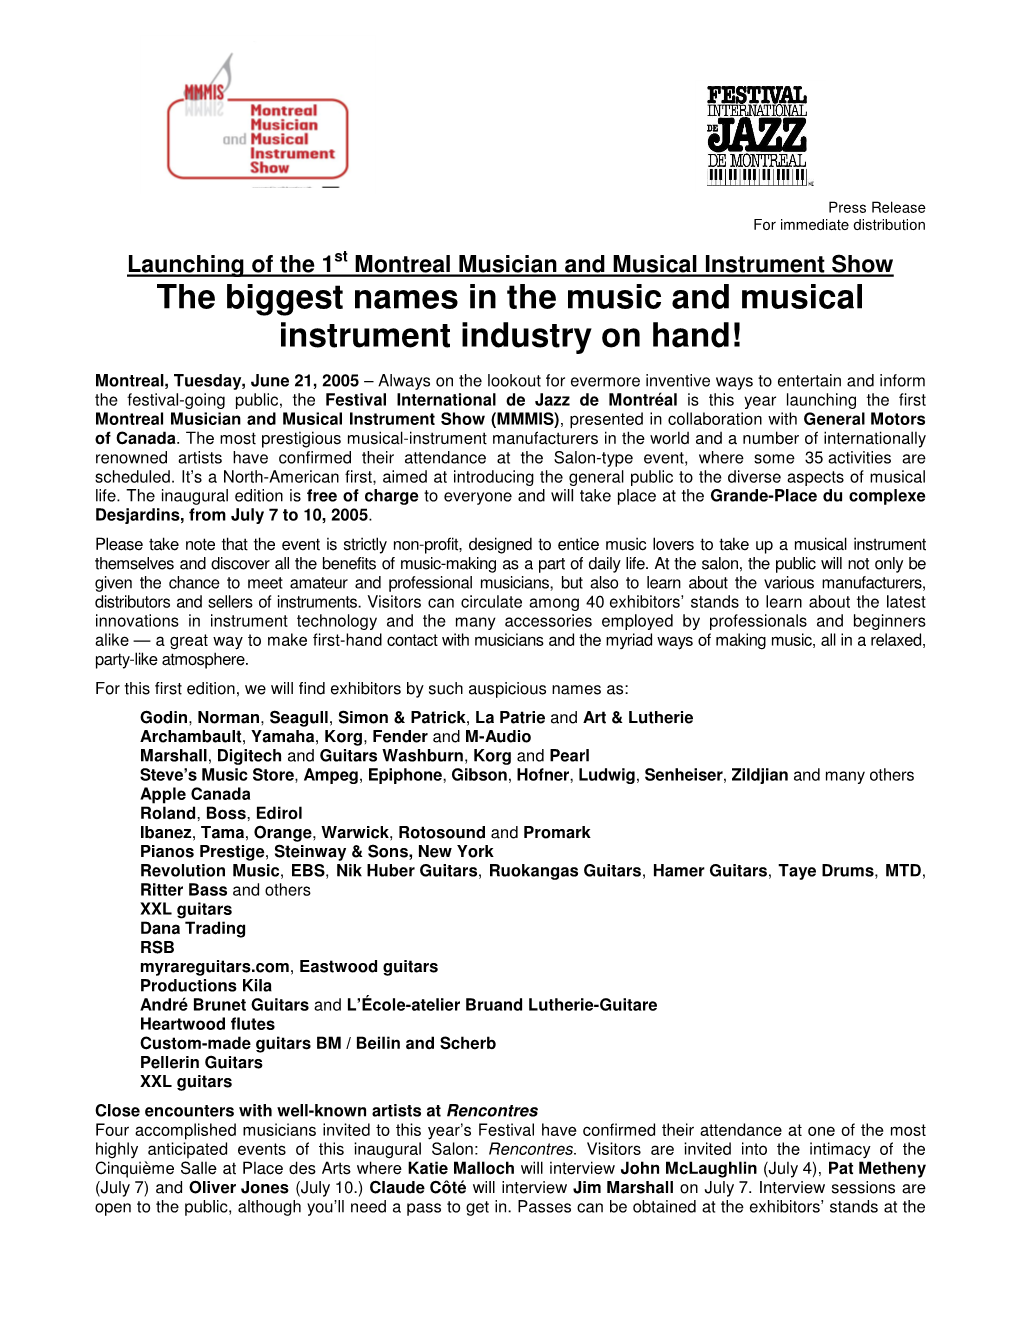 The Biggest Names in the Music and Musical Instrument Industry on Hand!